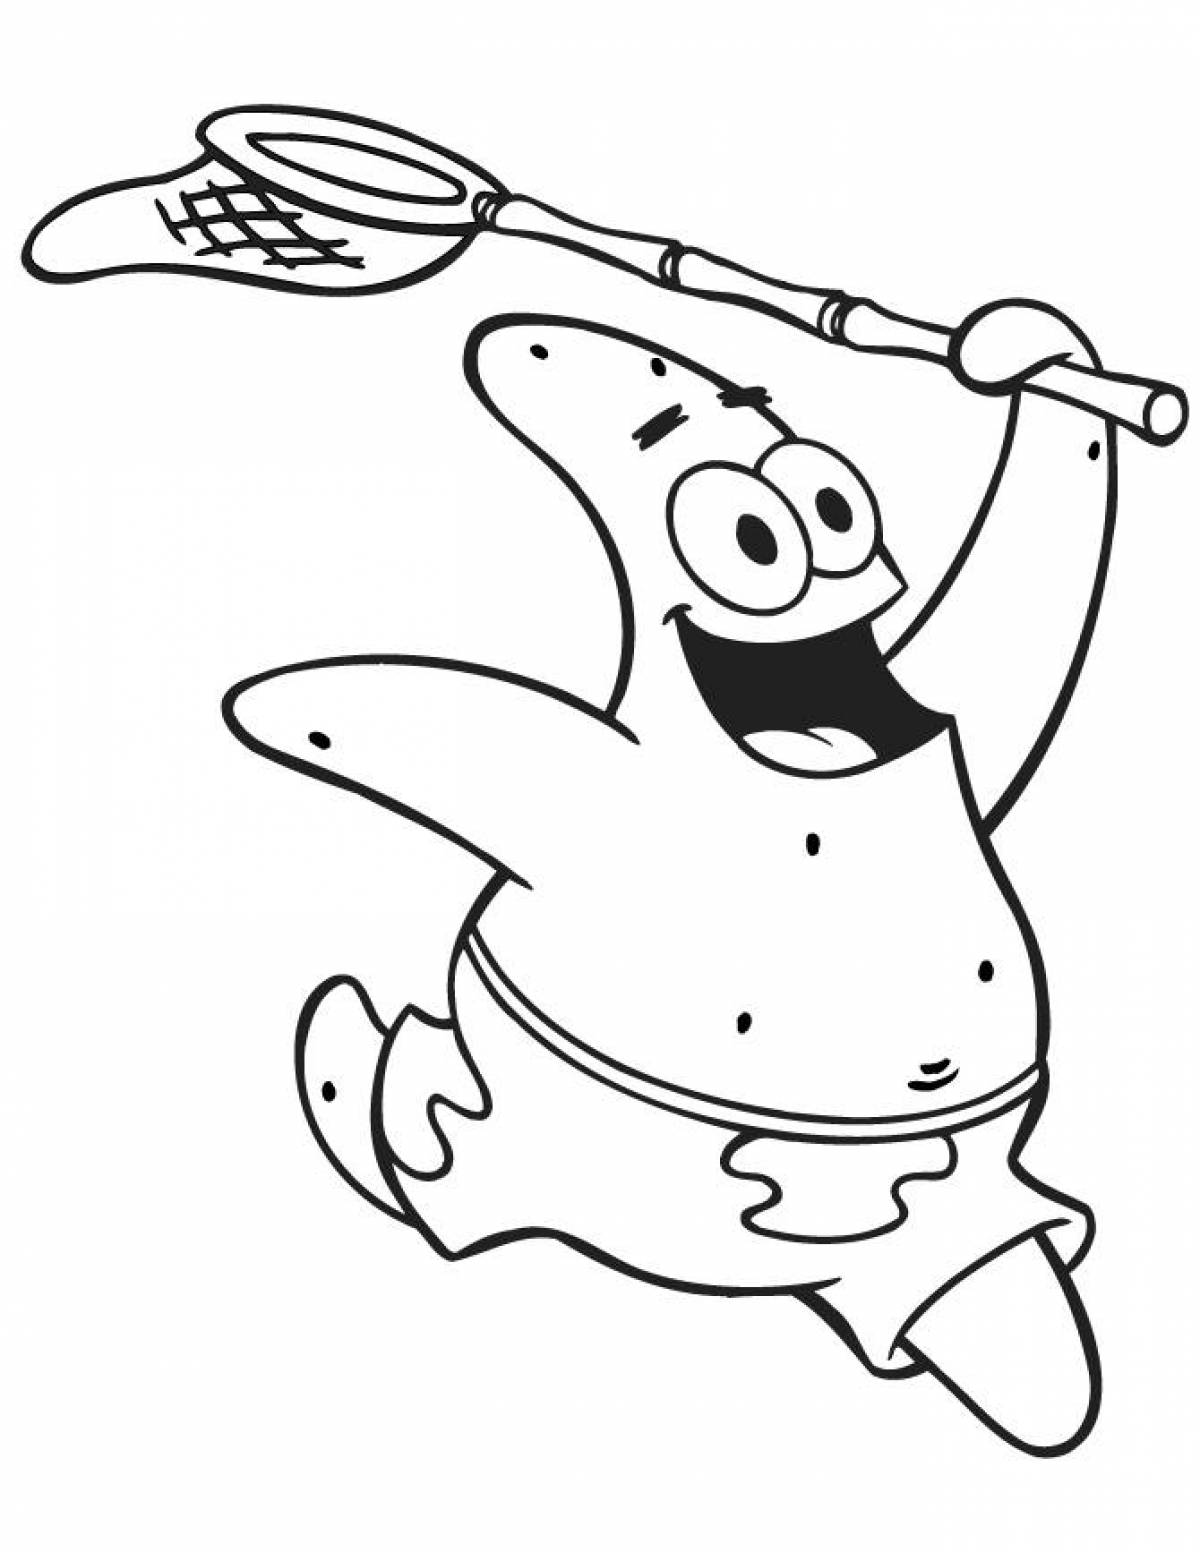 Patrick's animated coloring page